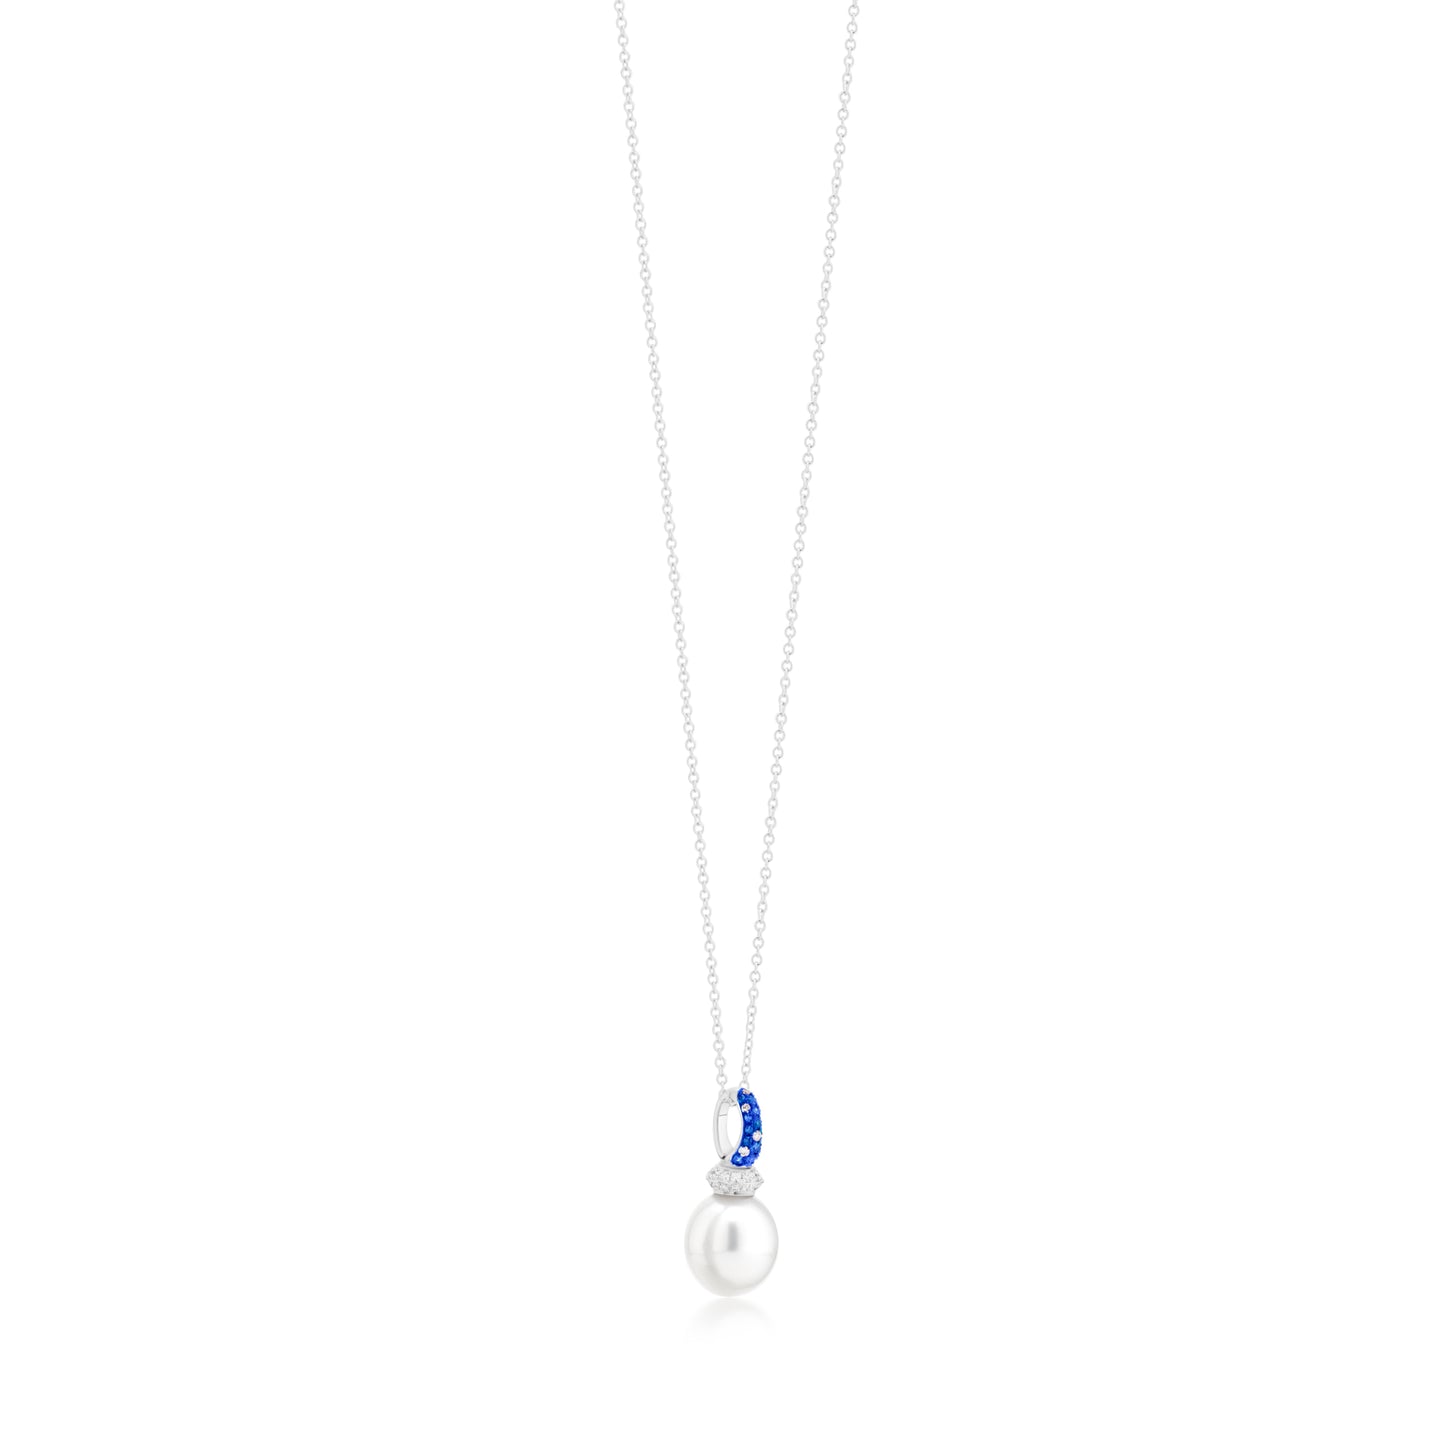 Necklace With Sapphire,Pearl And Diamond In 18K White Gold And Blue Rhodium